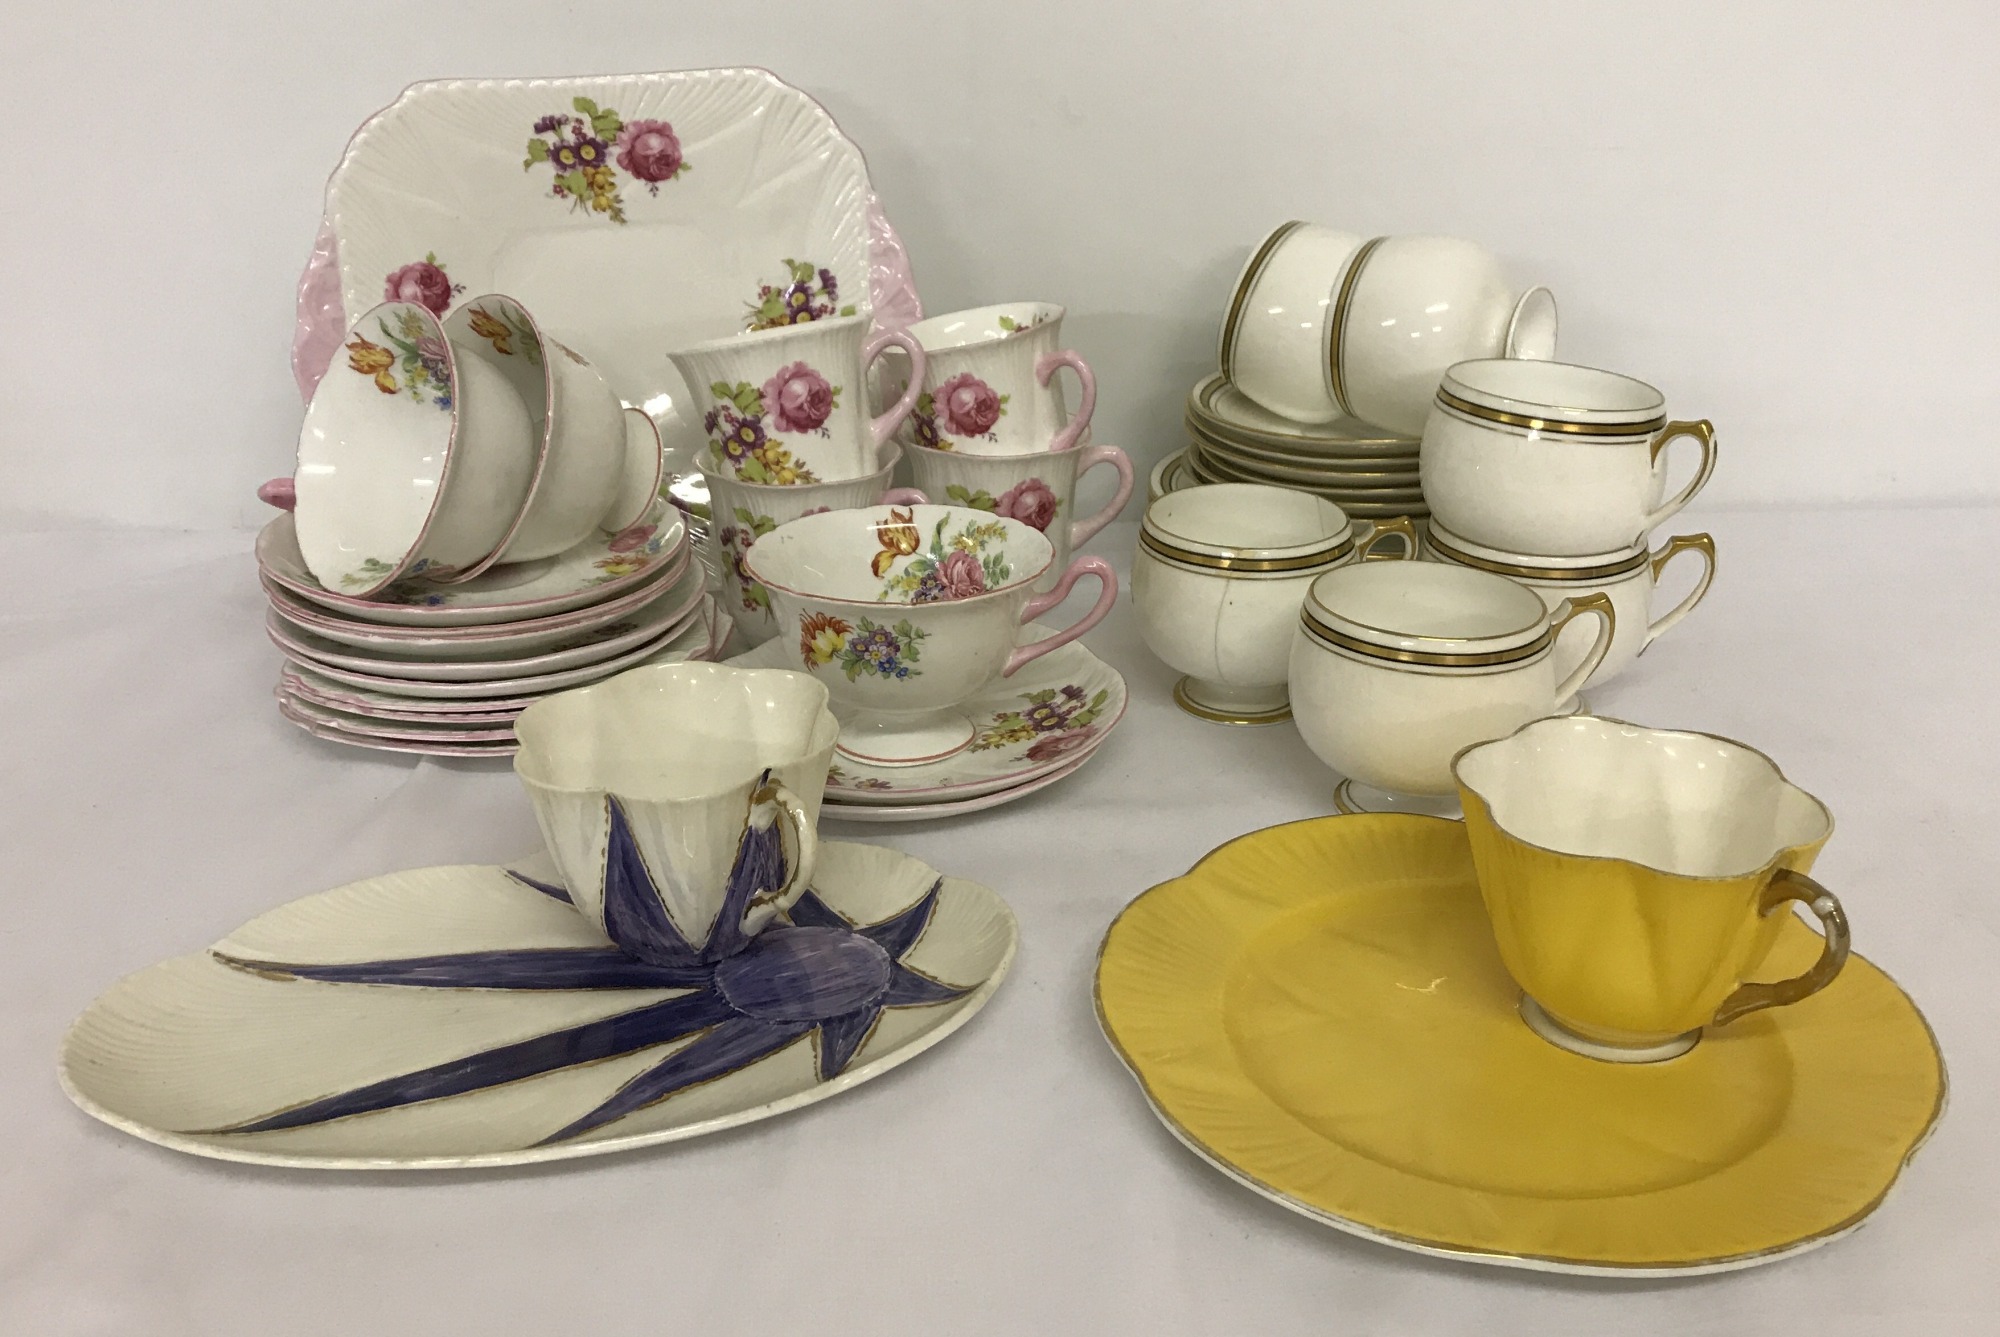 A collection of vintage Shelley tea ware.